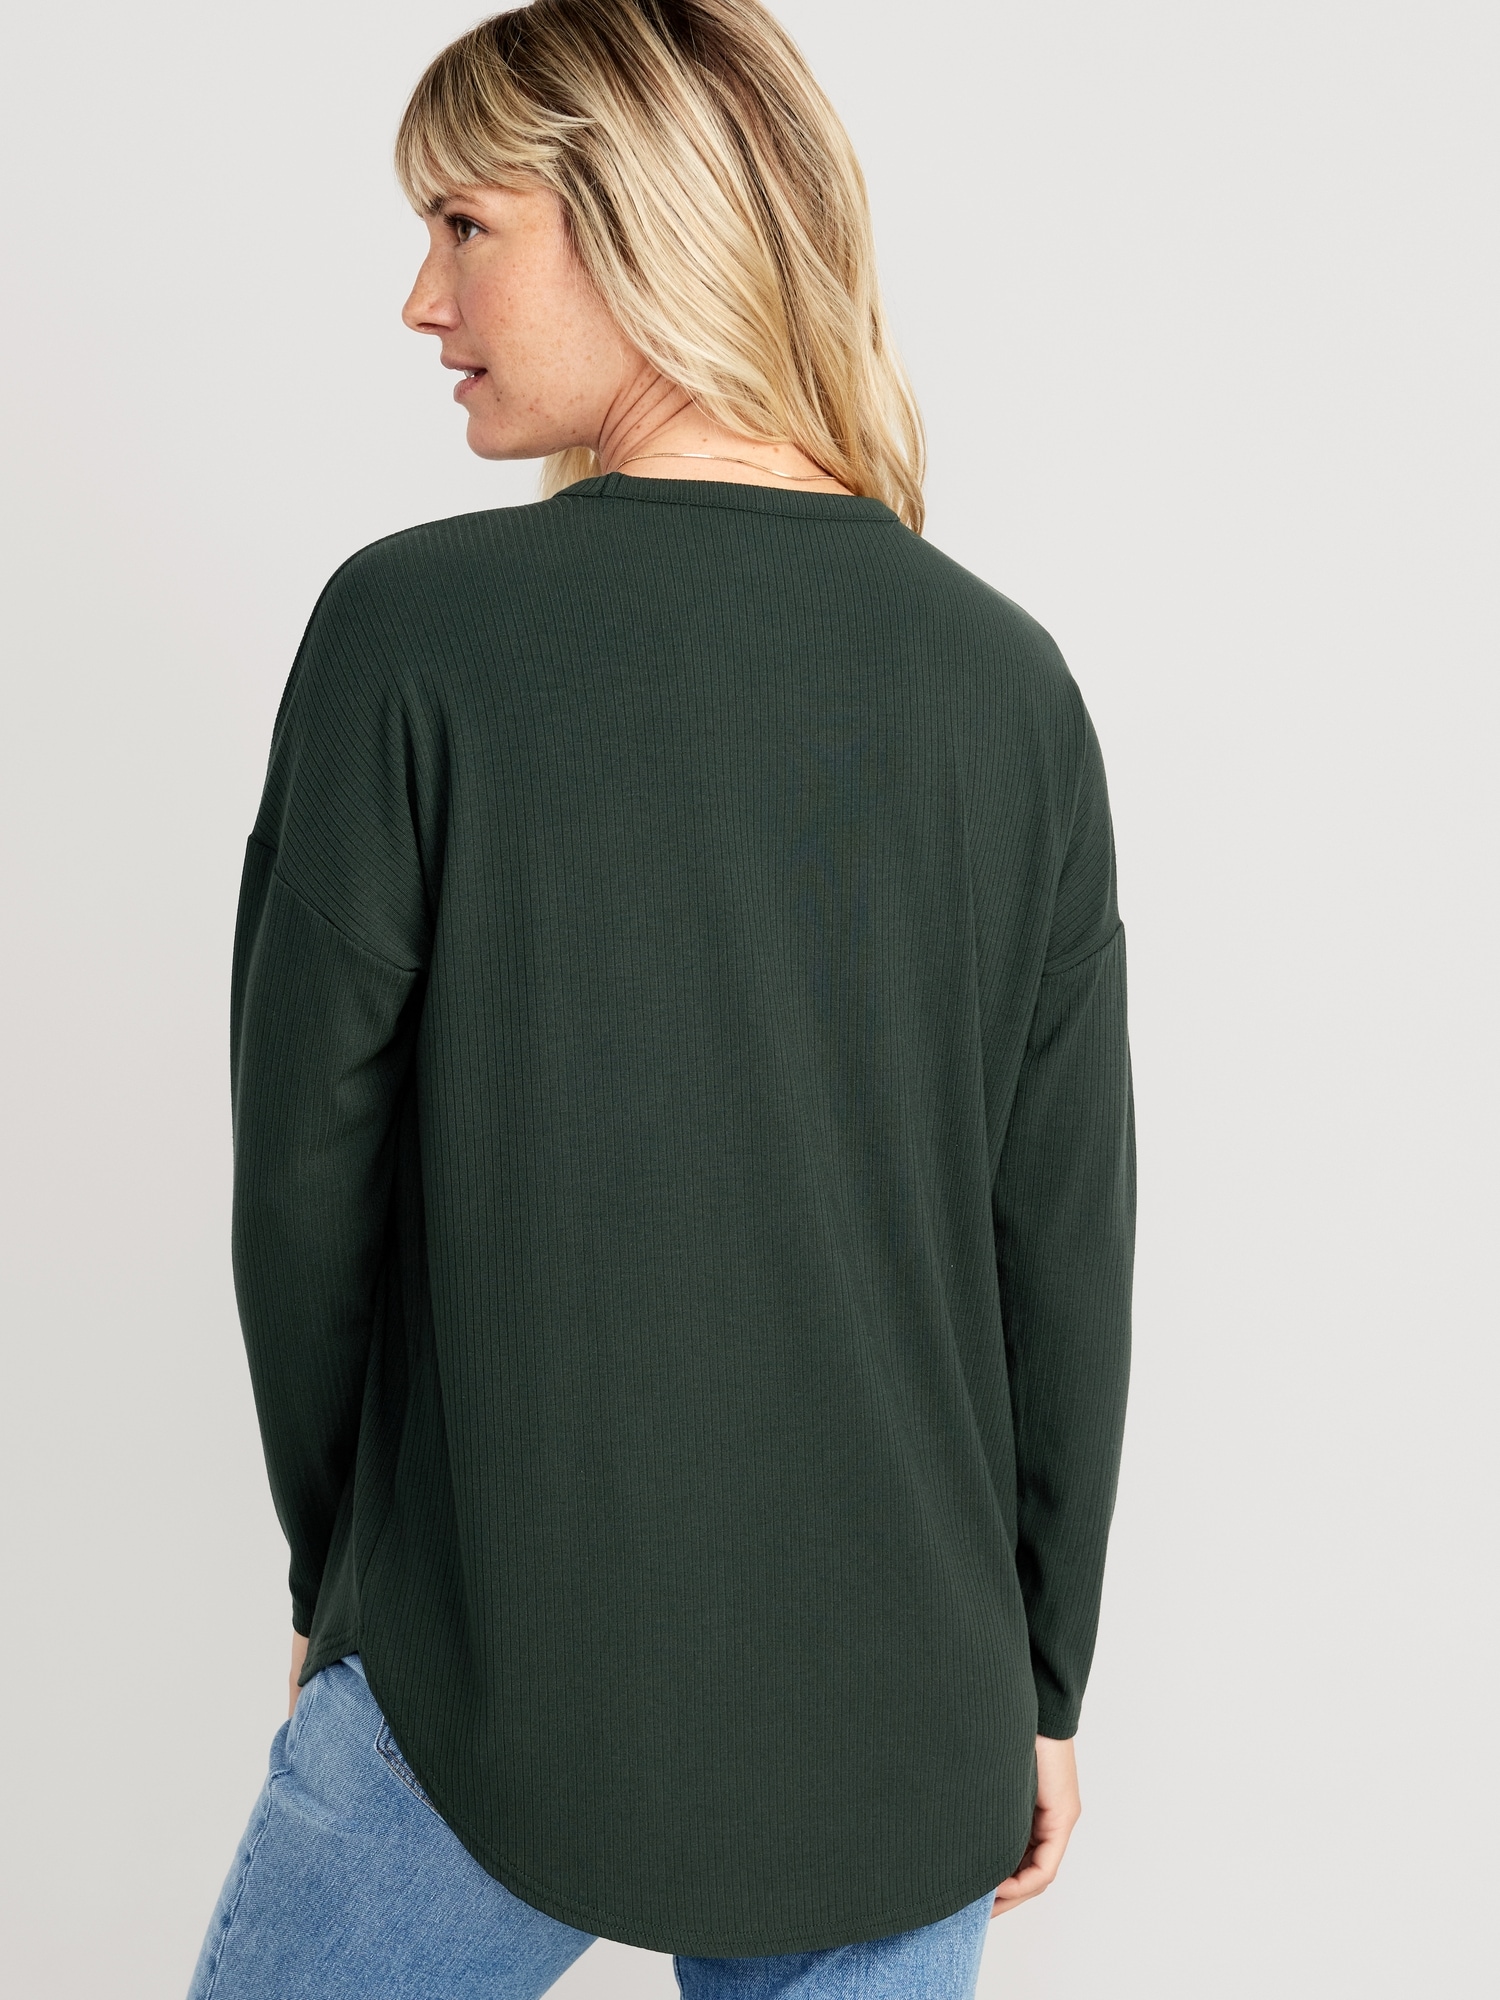 Navy for T-Shirt Rib-Knit Tunic | Luxe Old Women